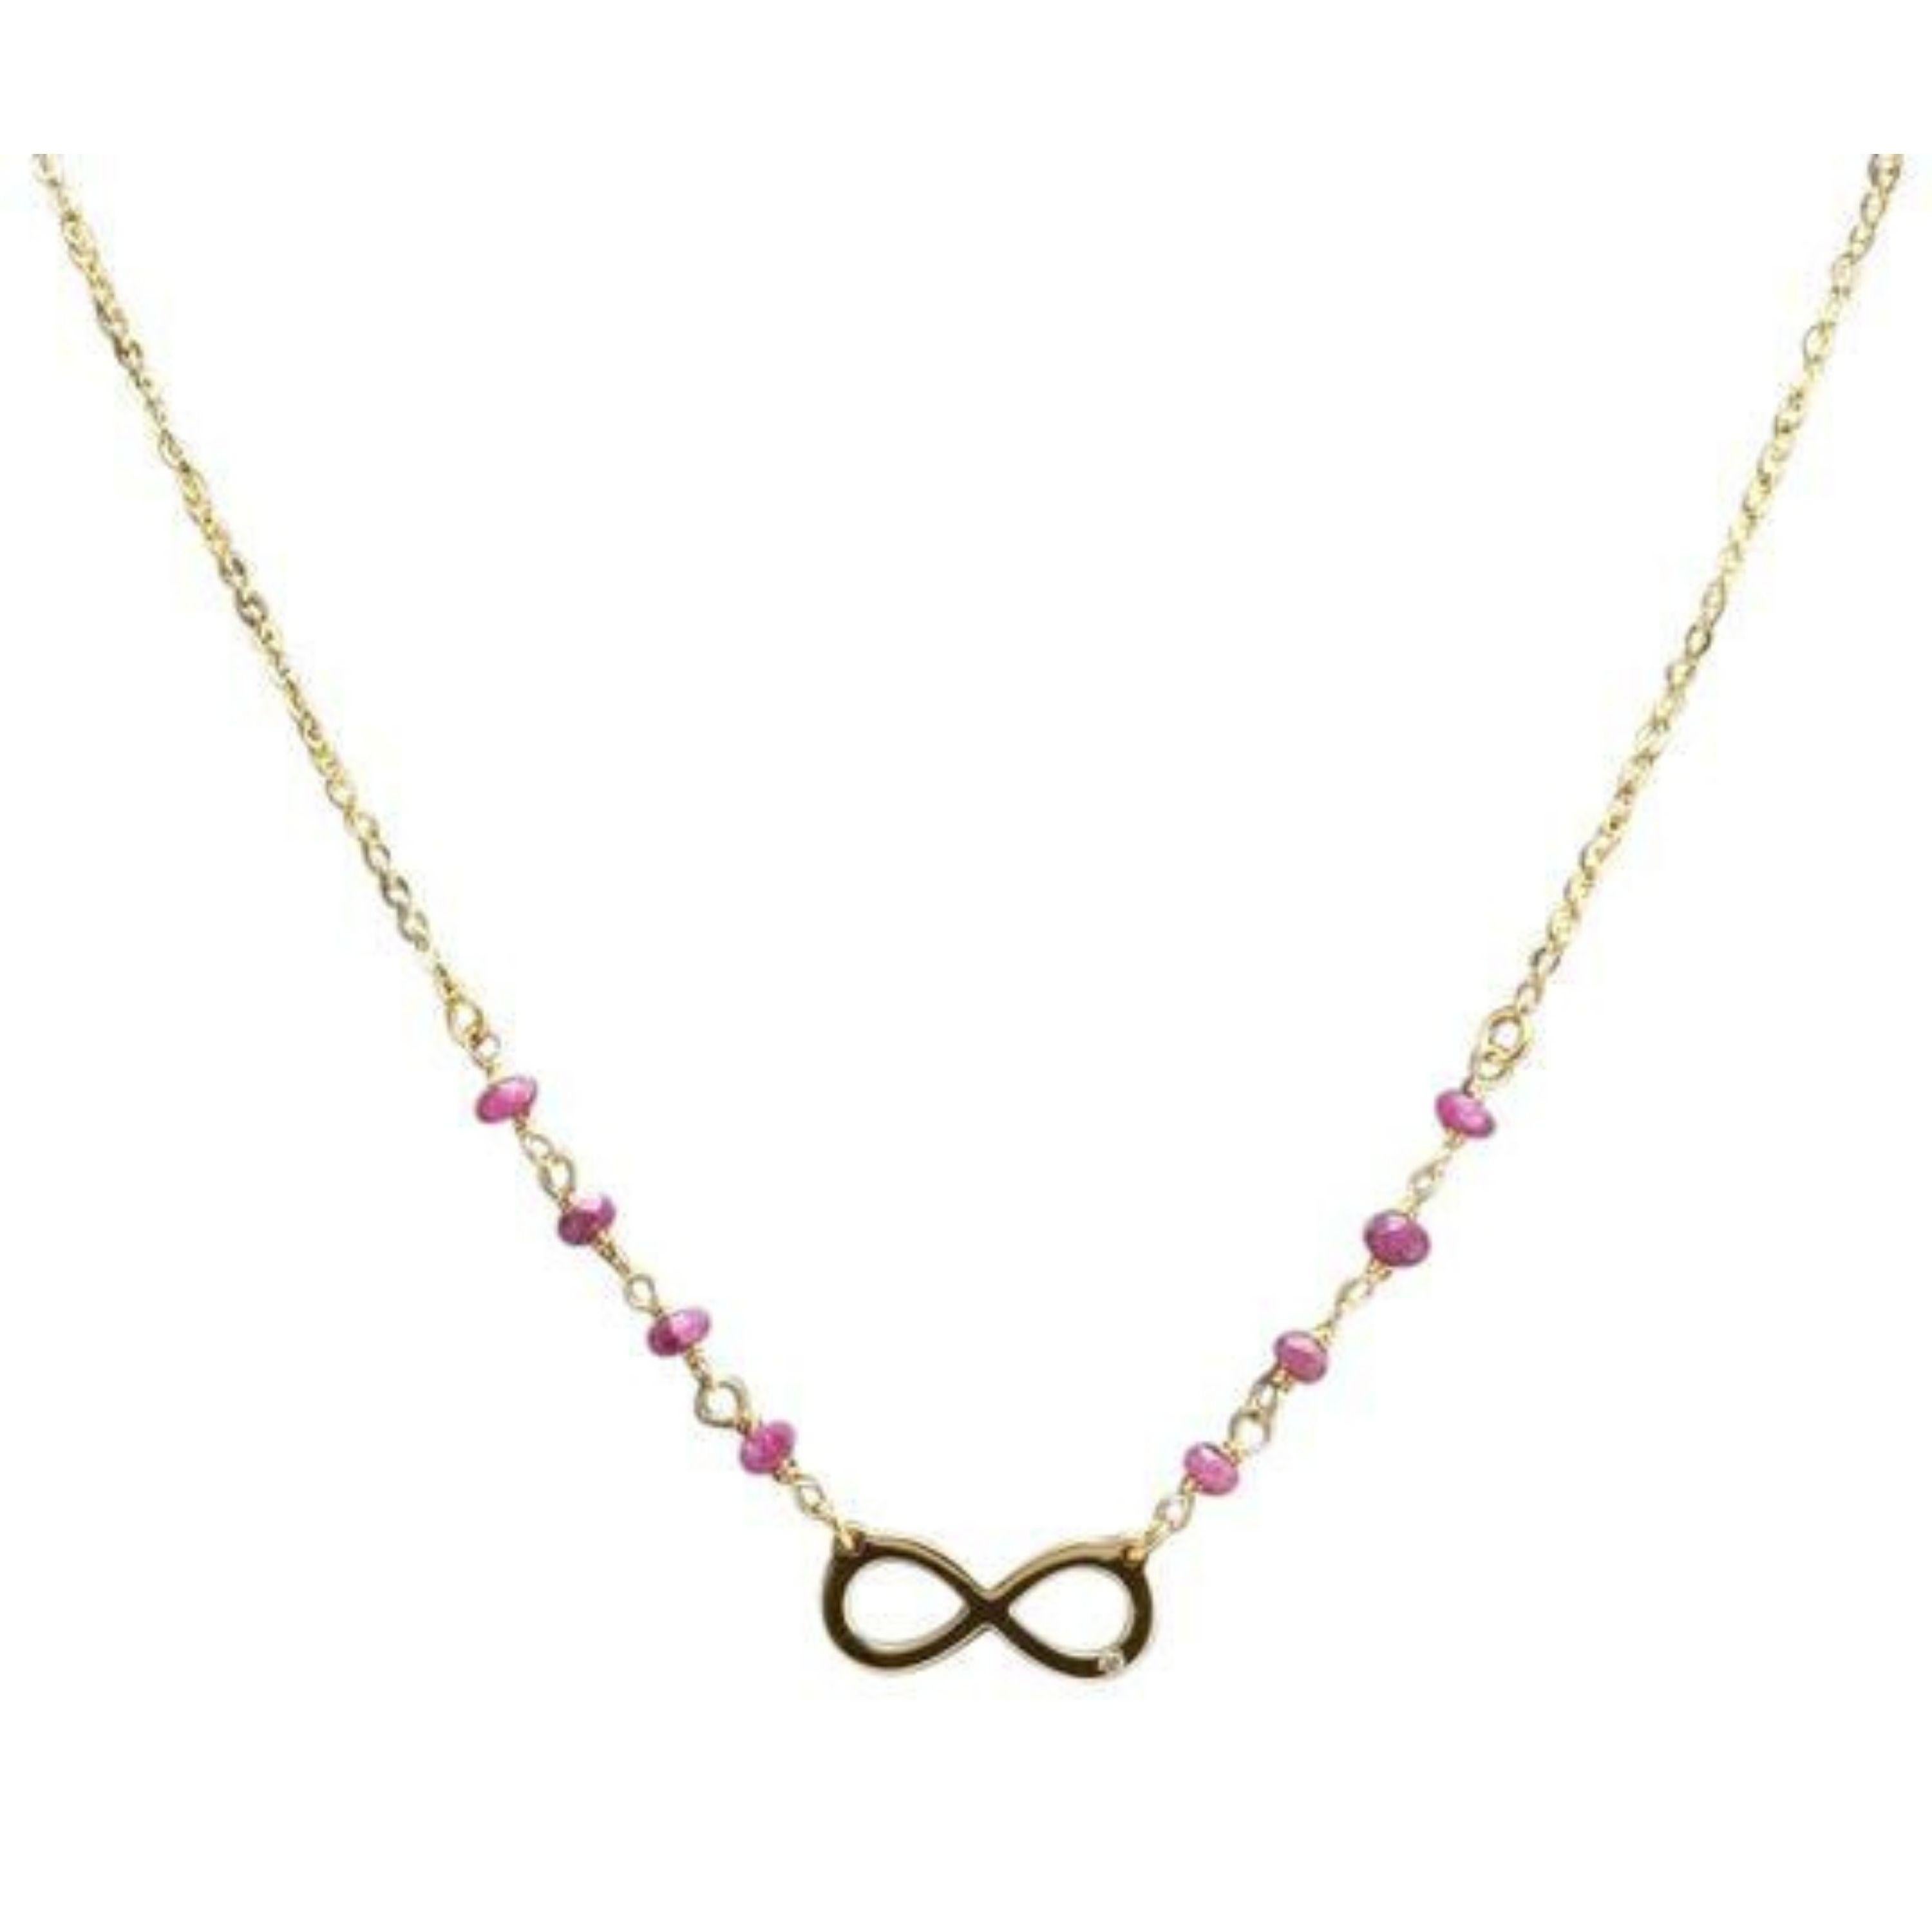 Splendid 14k Solid Yellow Gold Infinity Necklace with Natural Diamond Accent and Rough Rubies

Amazing looking piece!

Stamped: 14k

Natural Diamond Weight: 0.005ct (H / SI2)

Natural Rough Rubies

Chain Length is: Adjustable

Infinity Sign